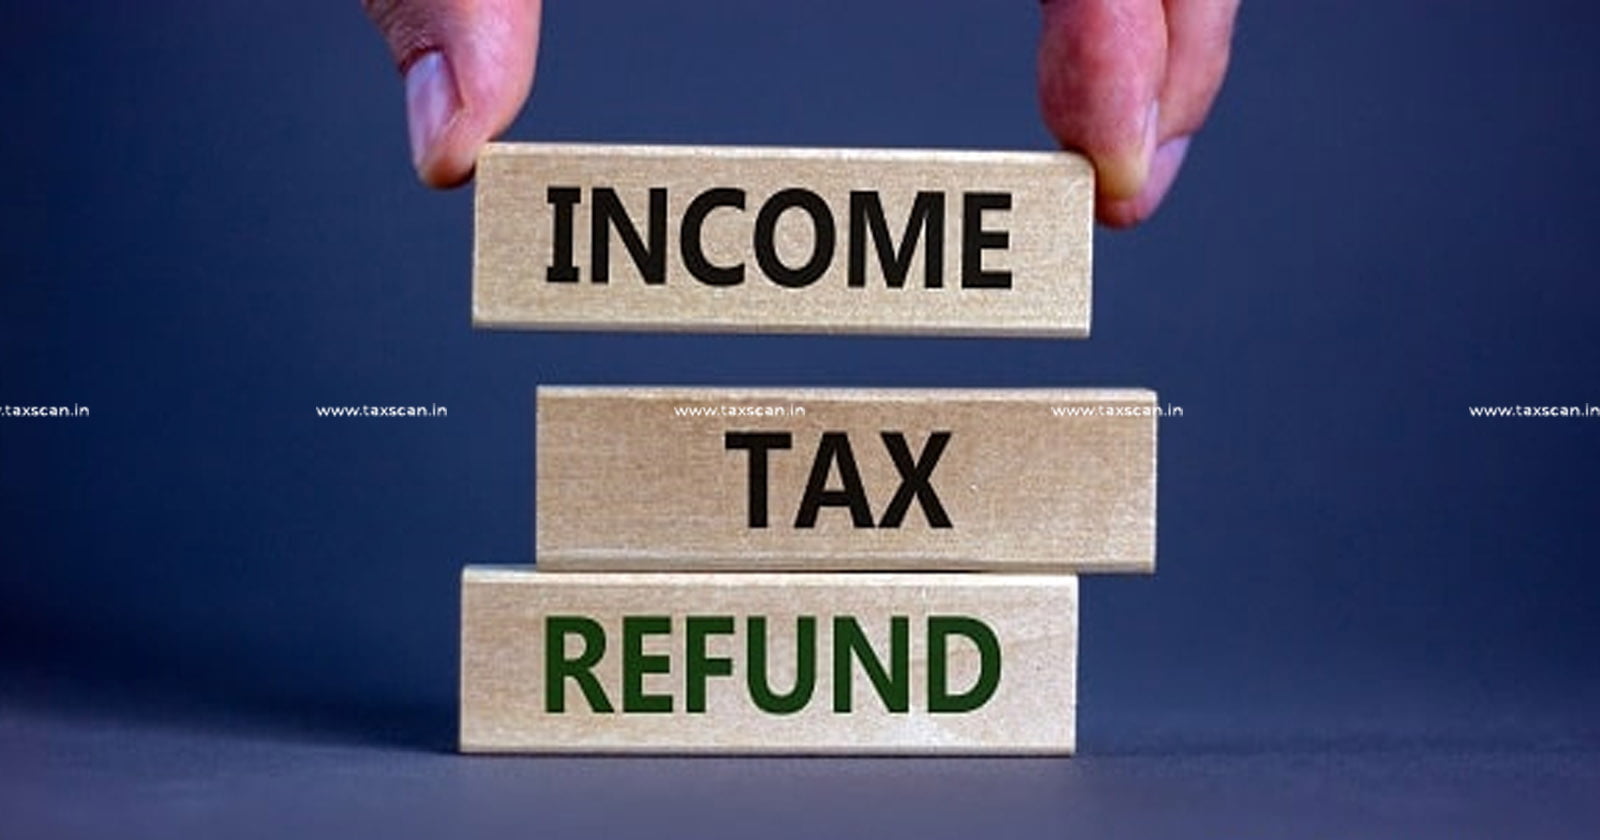 Businesses - Swift Income Tax Refunds - Swift - Income Tax - Tax Refunds - Income Tax Refunds - Refunds - CII Survey - TAXSCAN